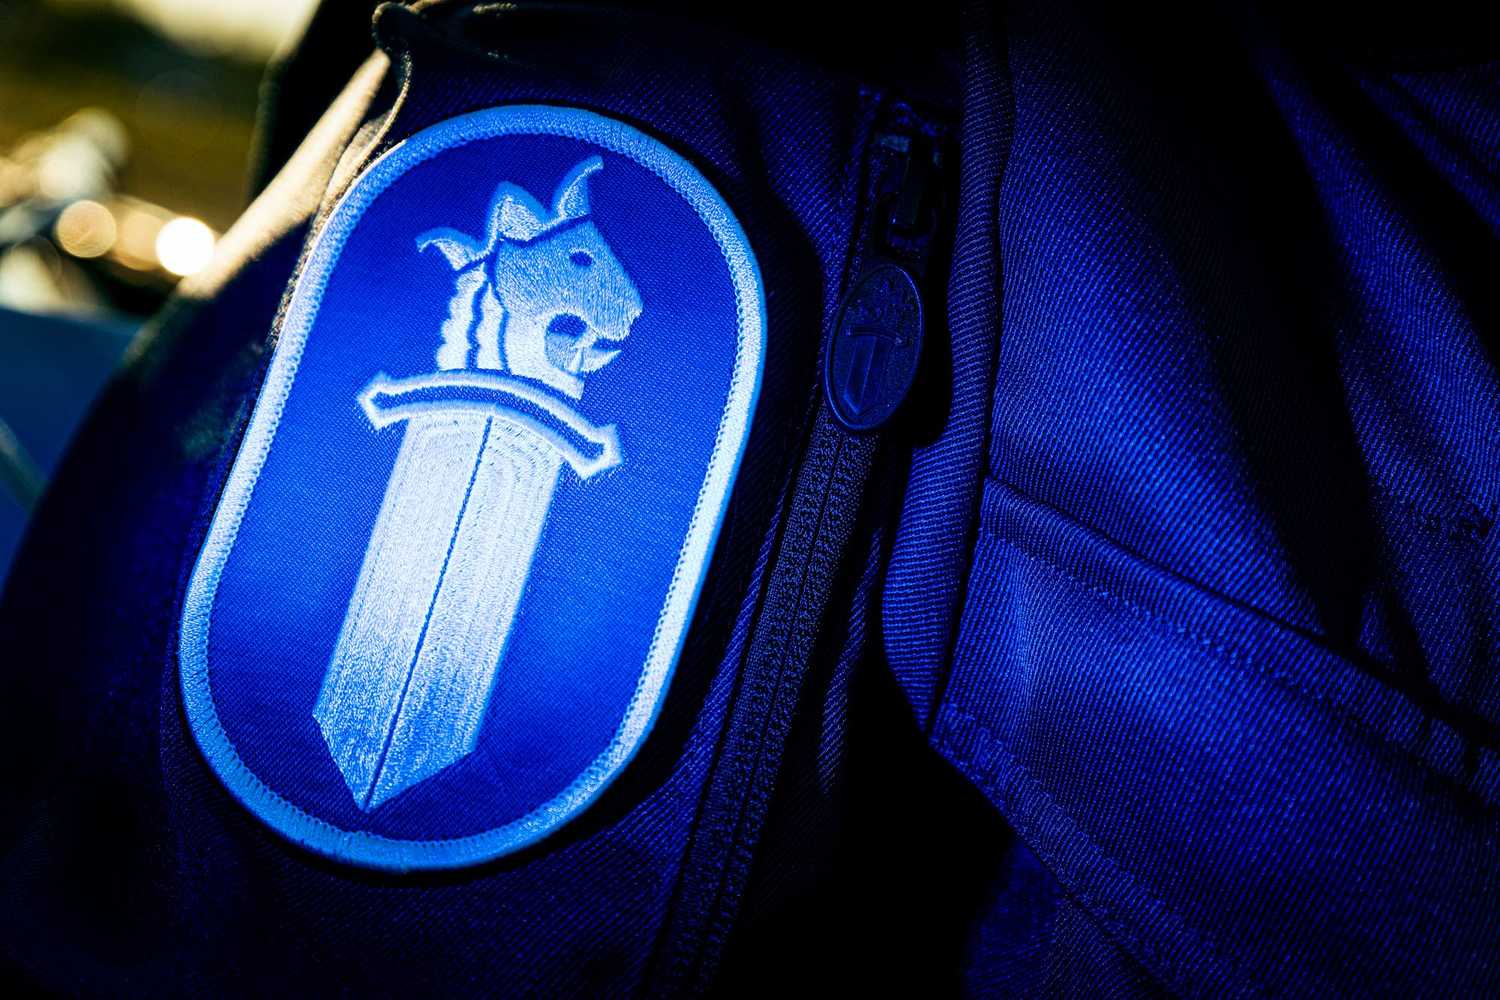 Police sword lion badge on the sleeve of the blue coverall.